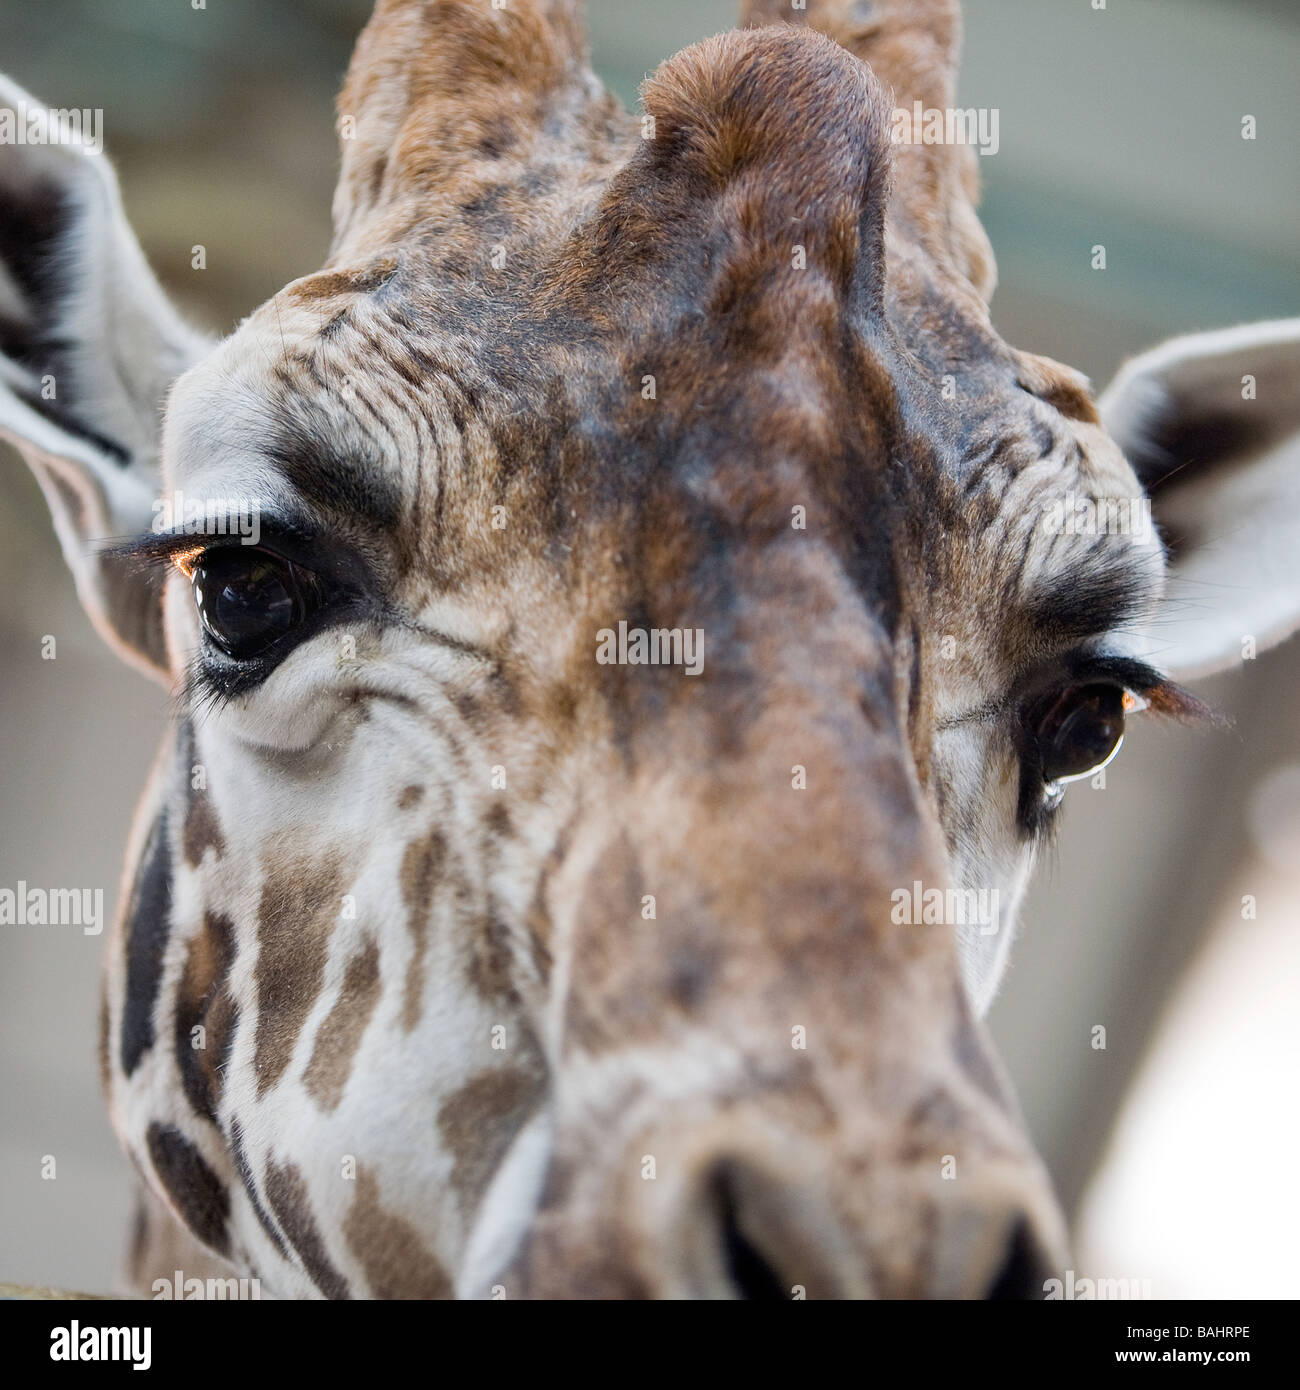 head of a giraffe looking over the top bar of its enclosure Stock Photo